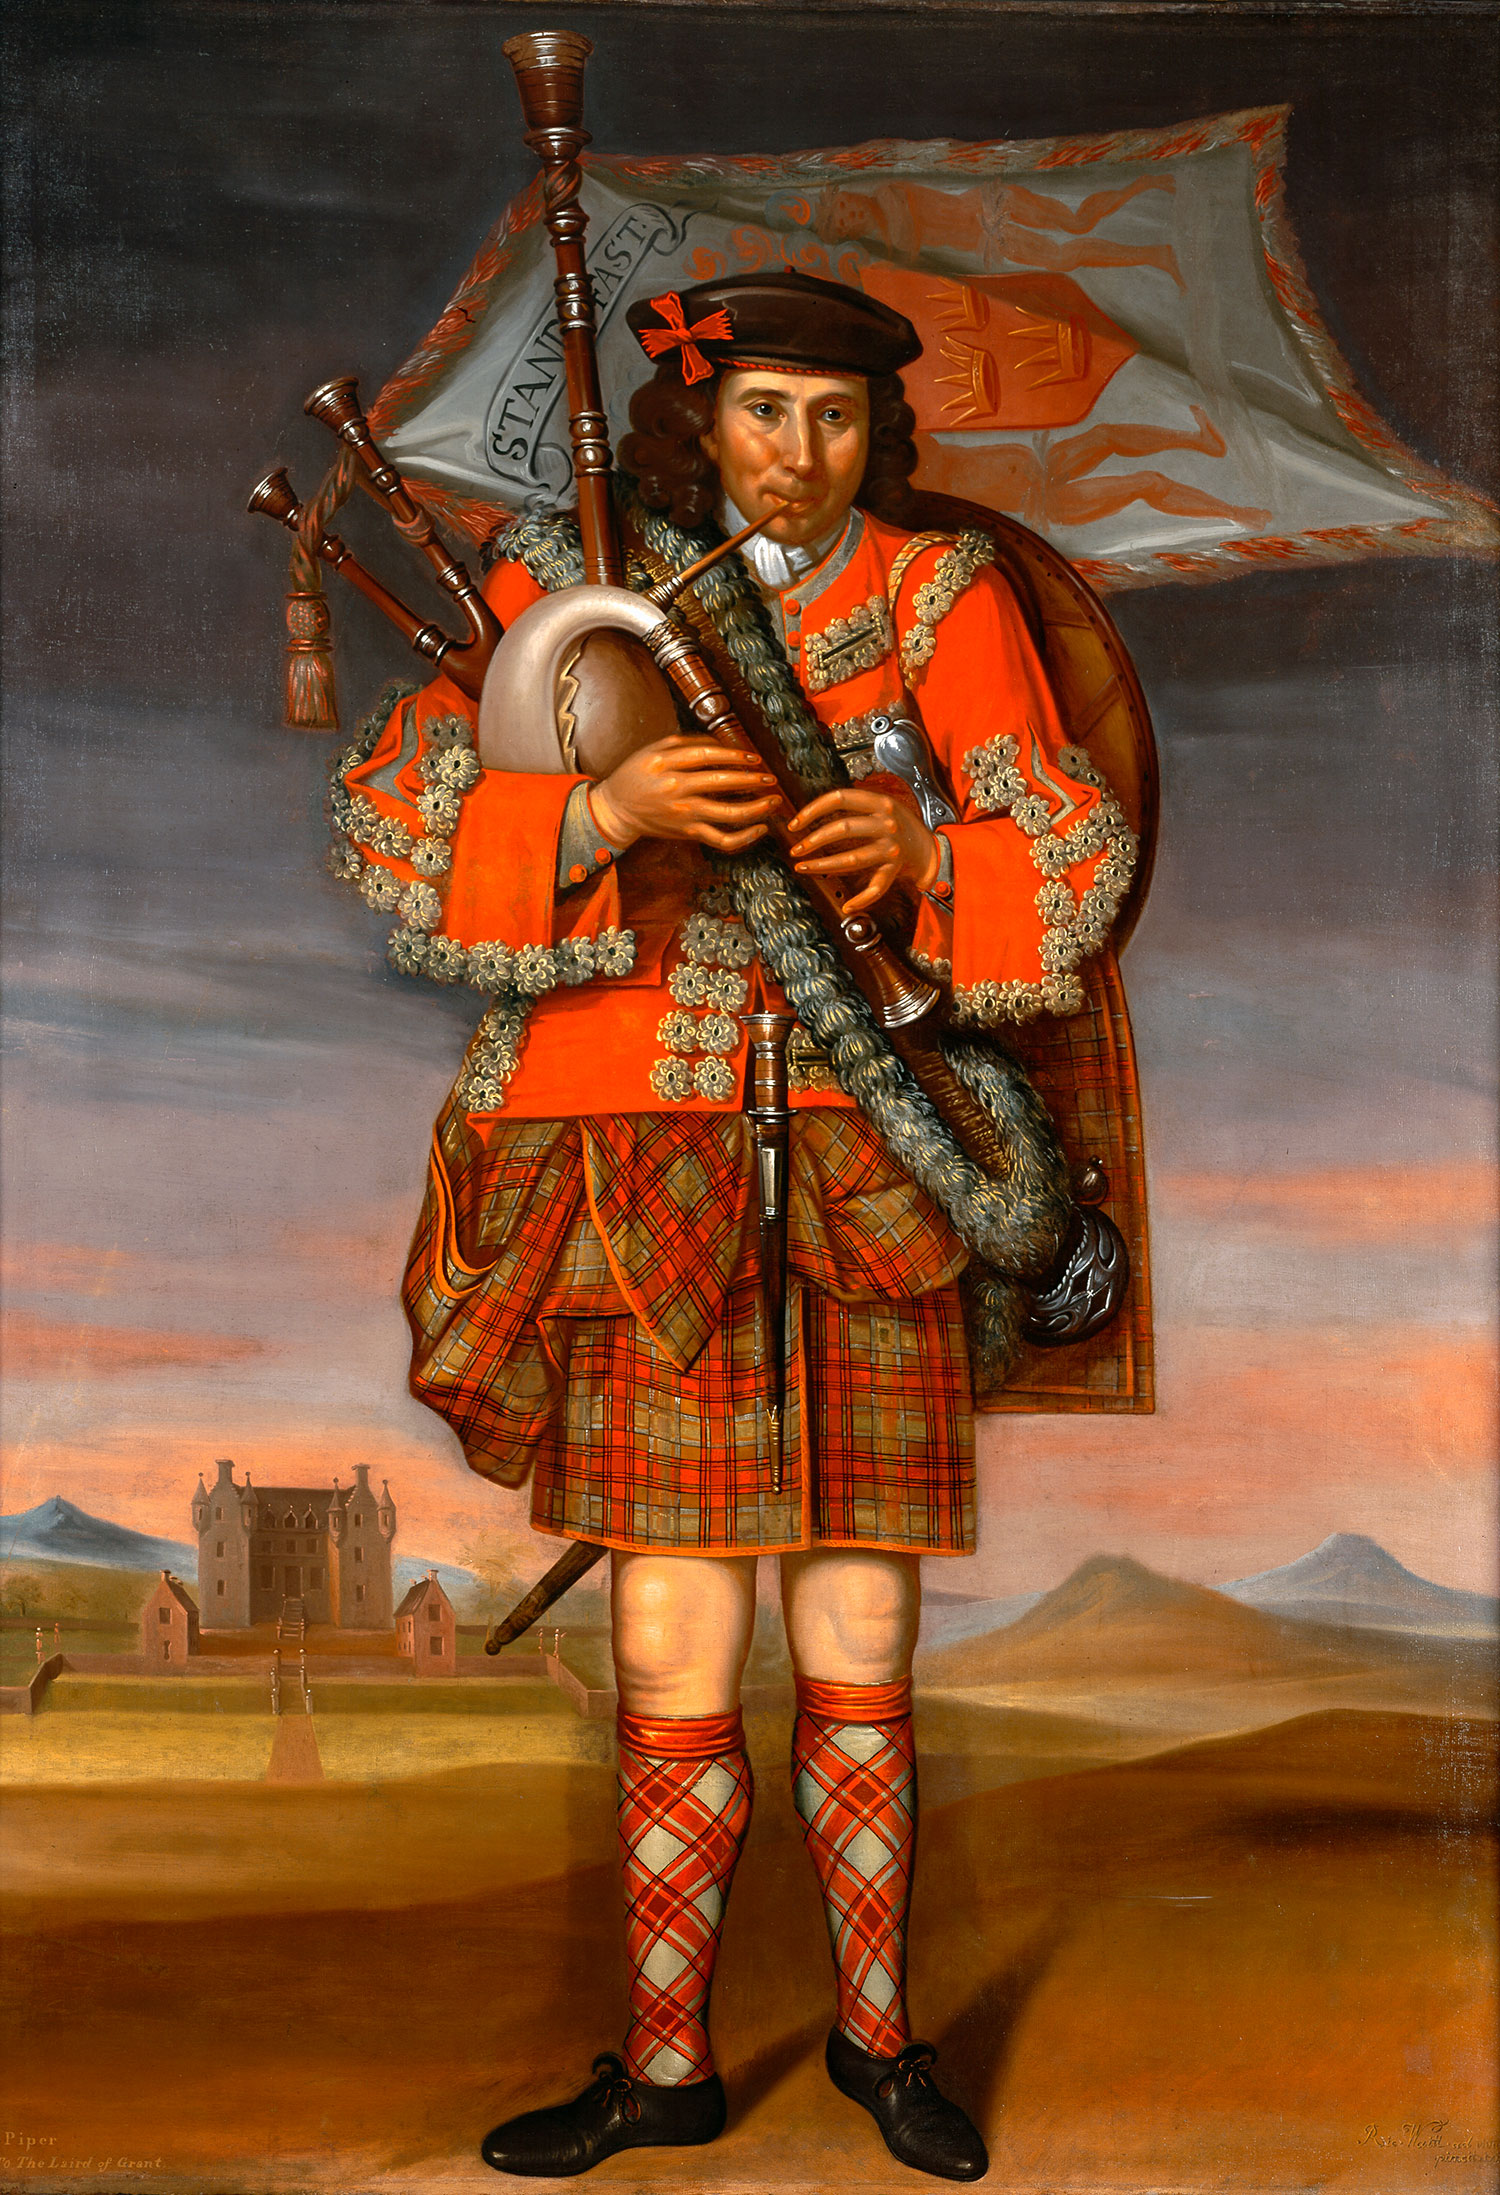 Painting-of-the-Laird-of-Grant's-Piper,-William-Cumming-by-Richard-Waitt,-1714-1500px.jpg